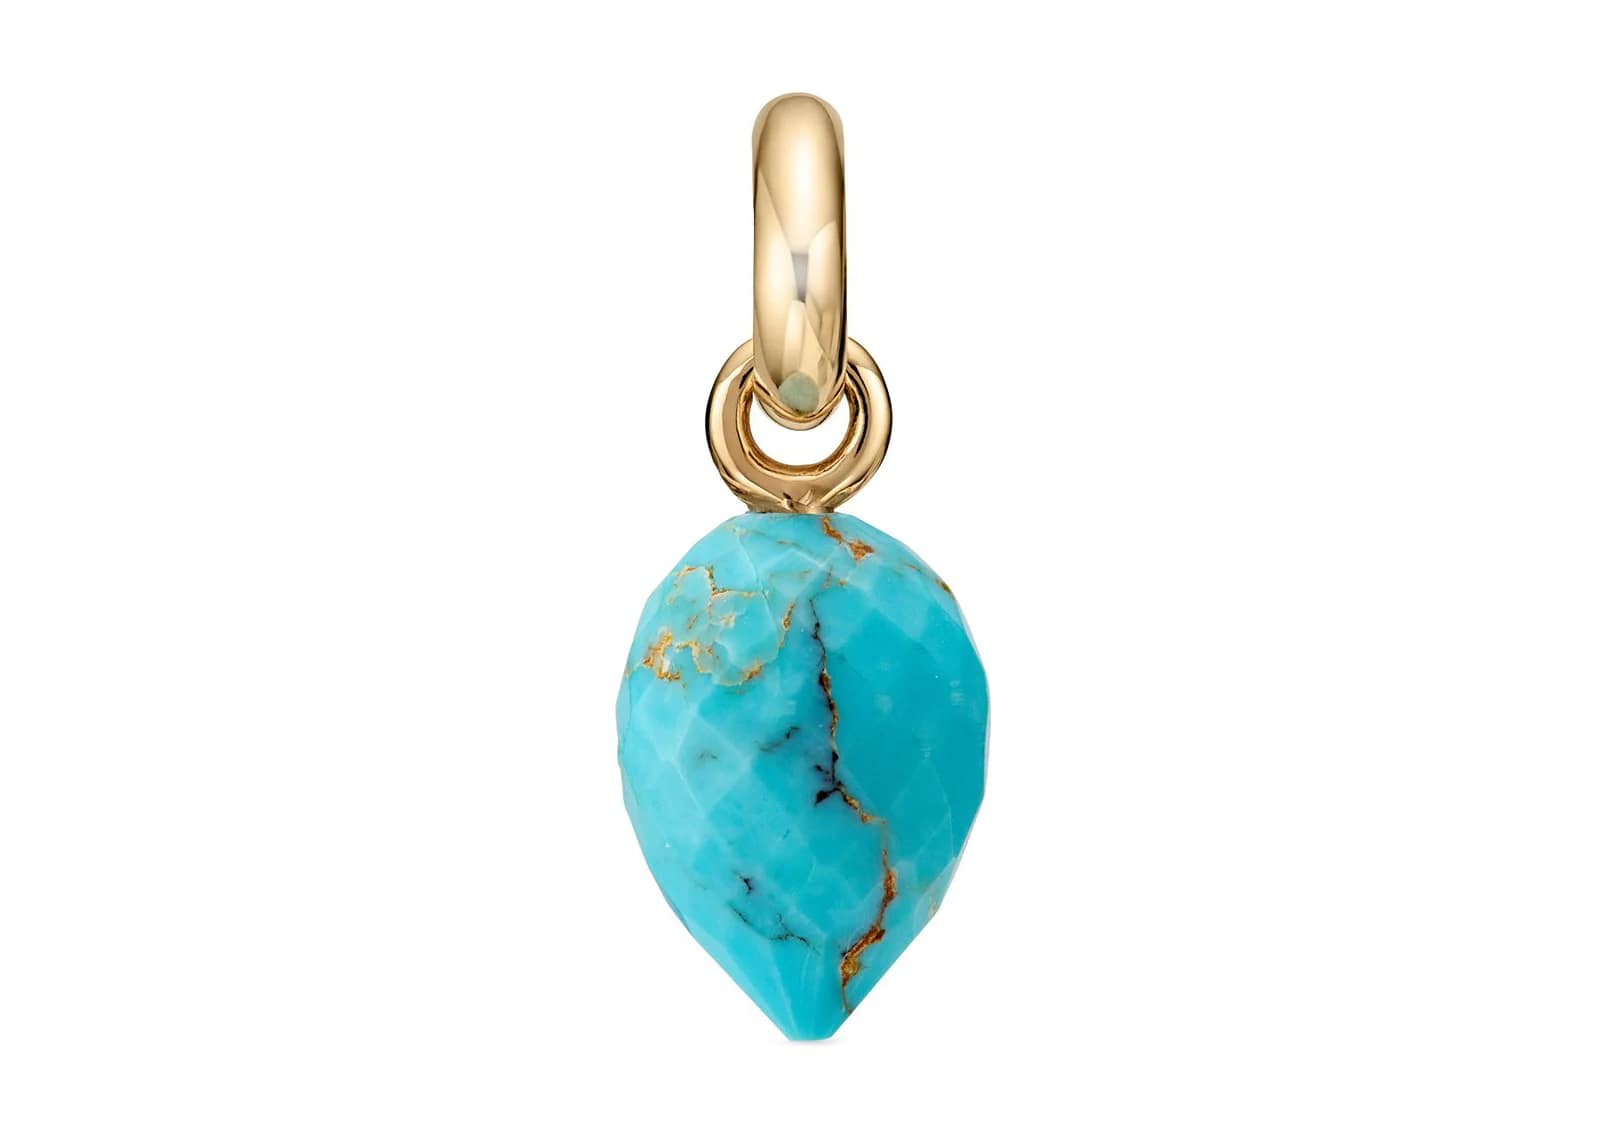 10 Recommended Turquoise Jewelry Pieces – All Affordable